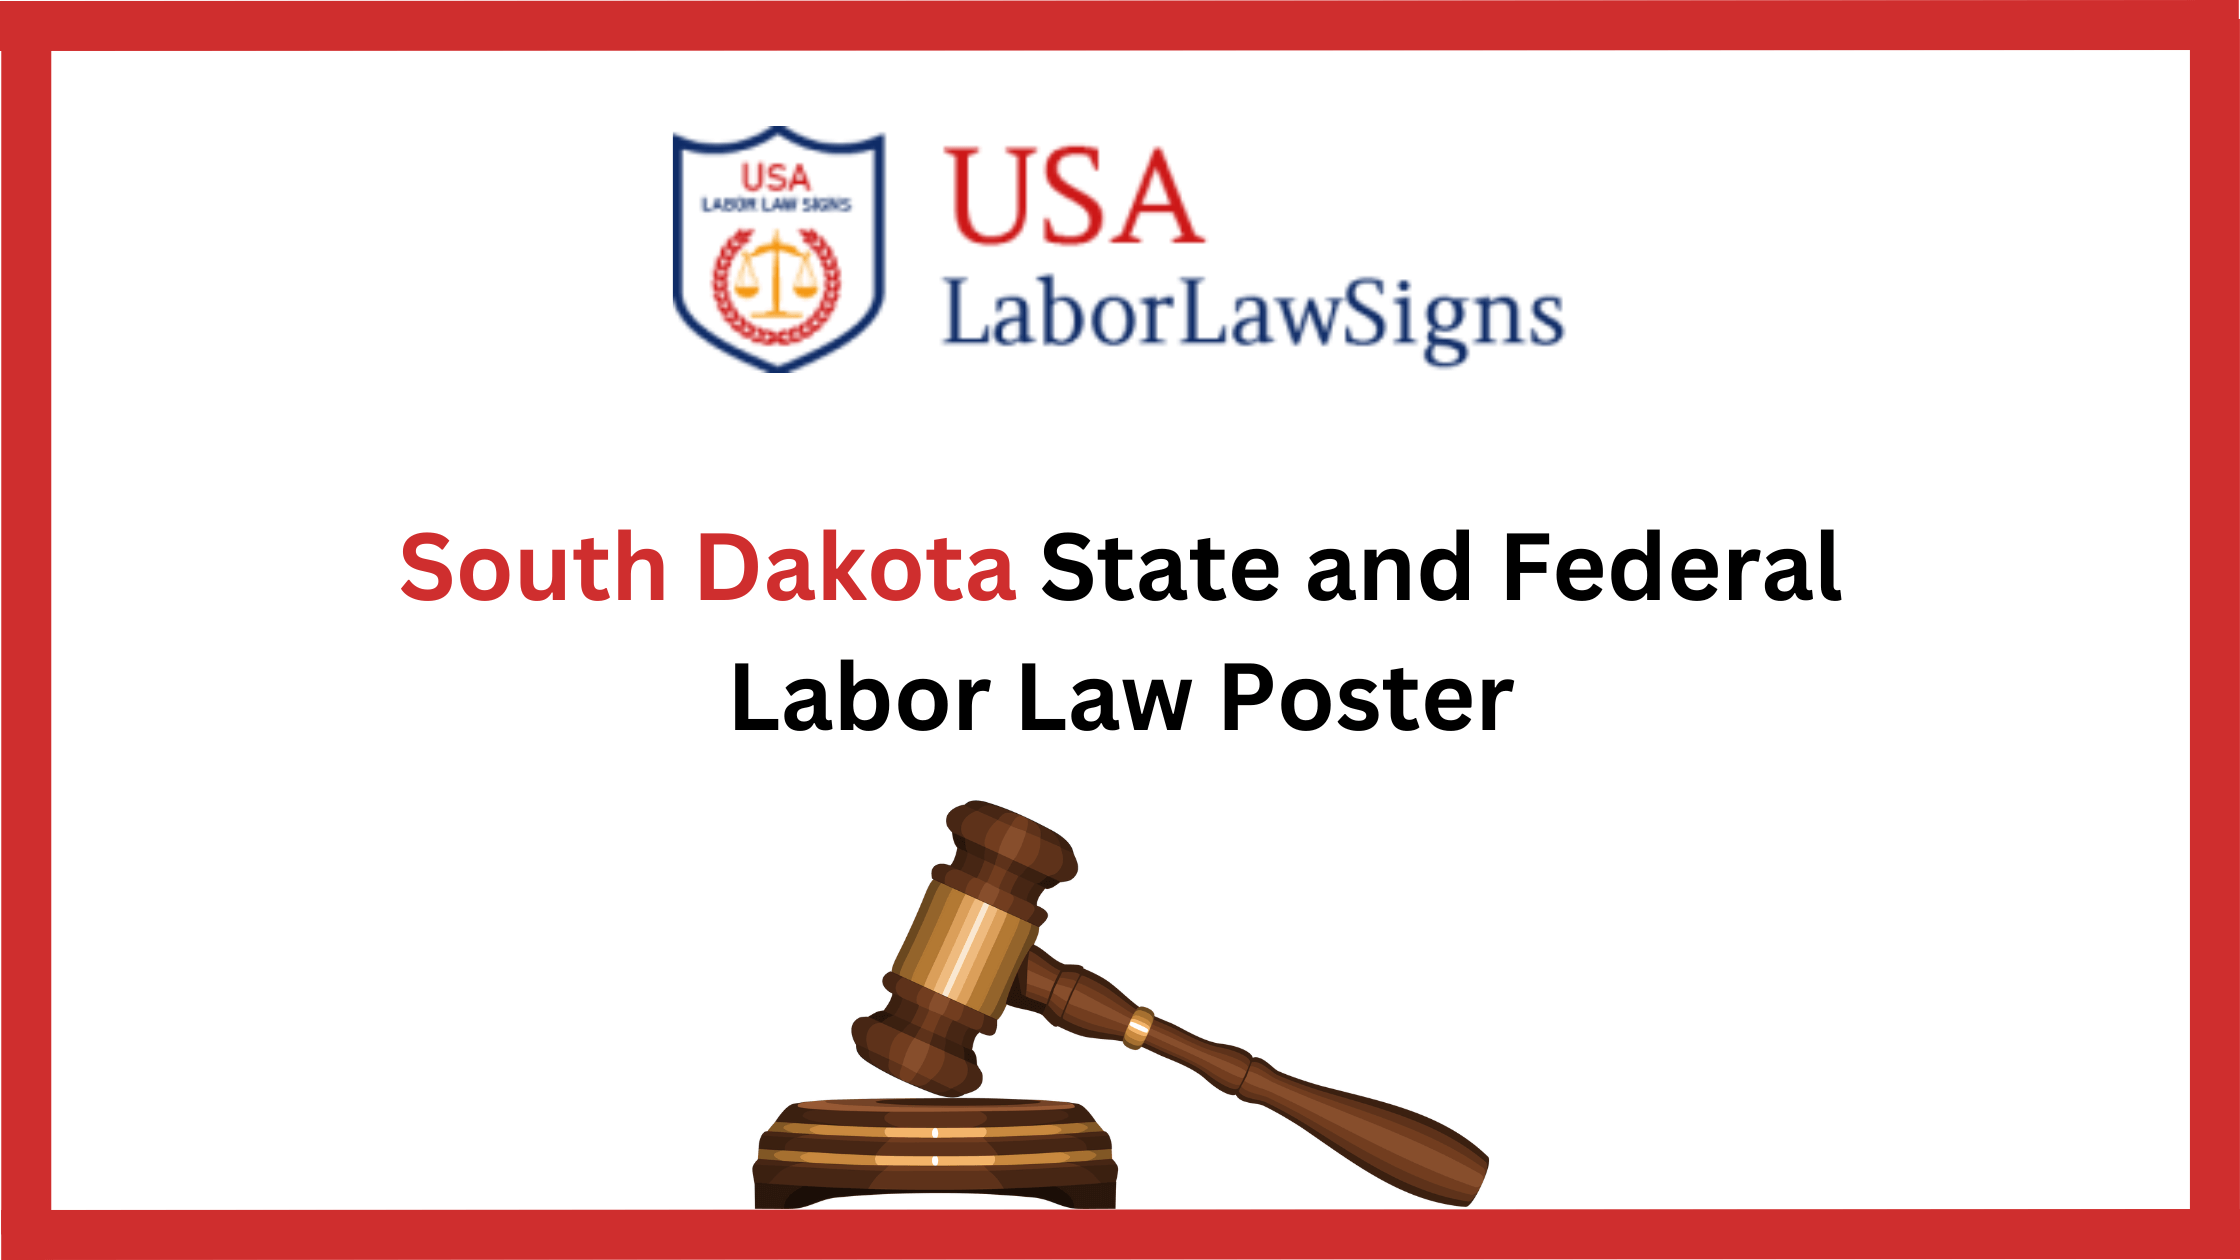 Avoiding Costly Fines: A Guide to South Dakota Labor Law Poster Compliance